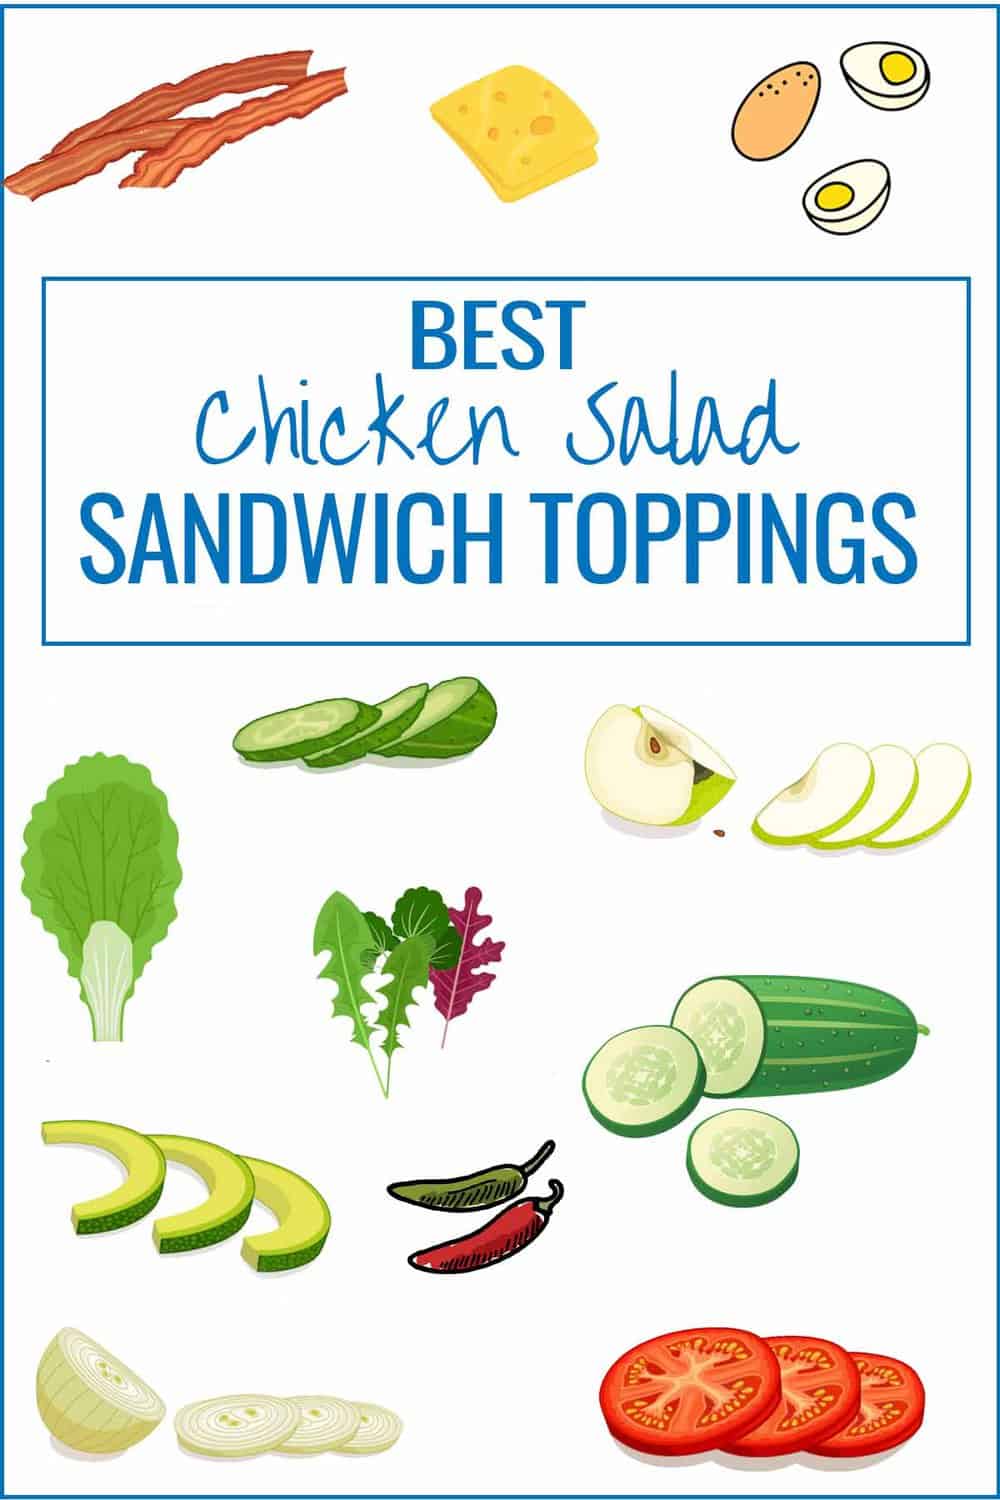 infographic showing chicken salad sandwich toppings